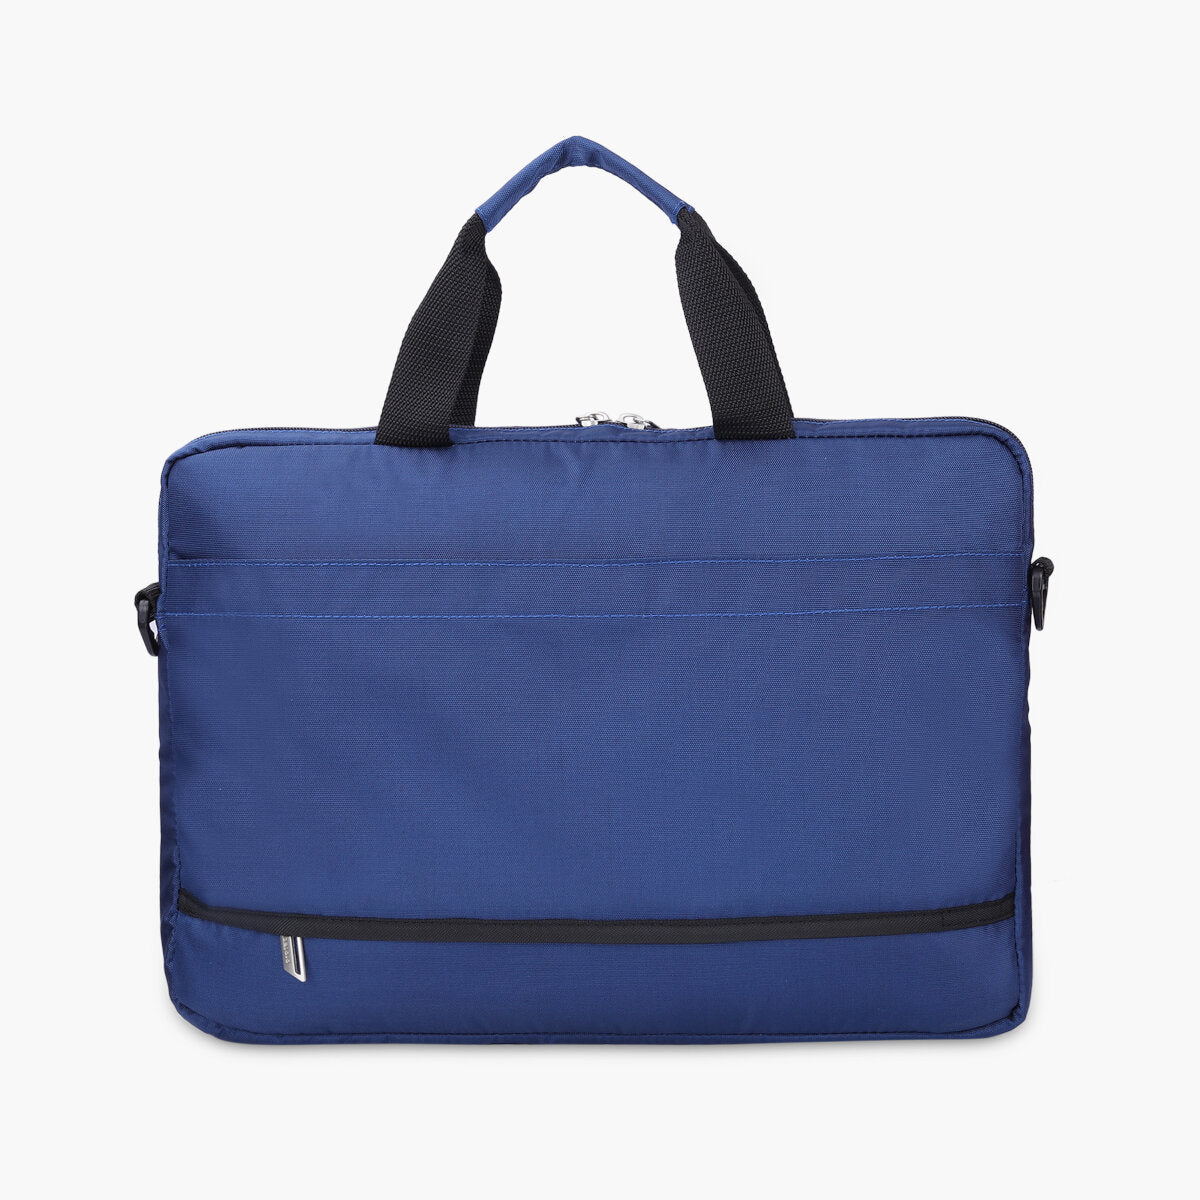 Navy-Blue | Protecta Staunch Ally Lite Slim Office Laptop Bag-5